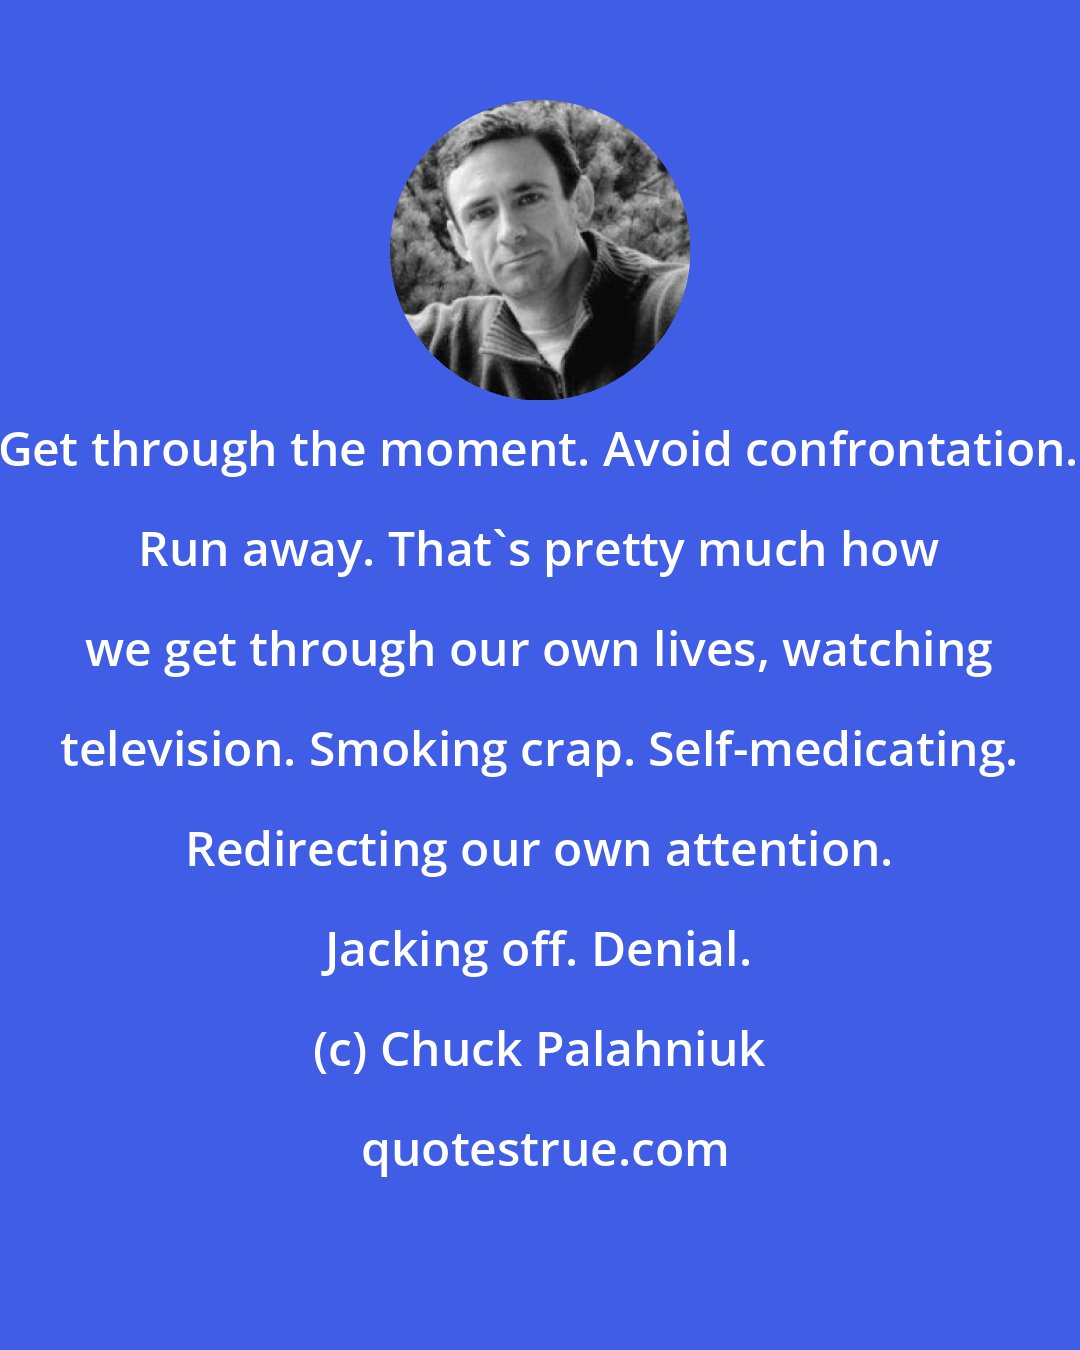 Chuck Palahniuk: Get through the moment. Avoid confrontation. Run away. That's pretty much how we get through our own lives, watching television. Smoking crap. Self-medicating. Redirecting our own attention. Jacking off. Denial.